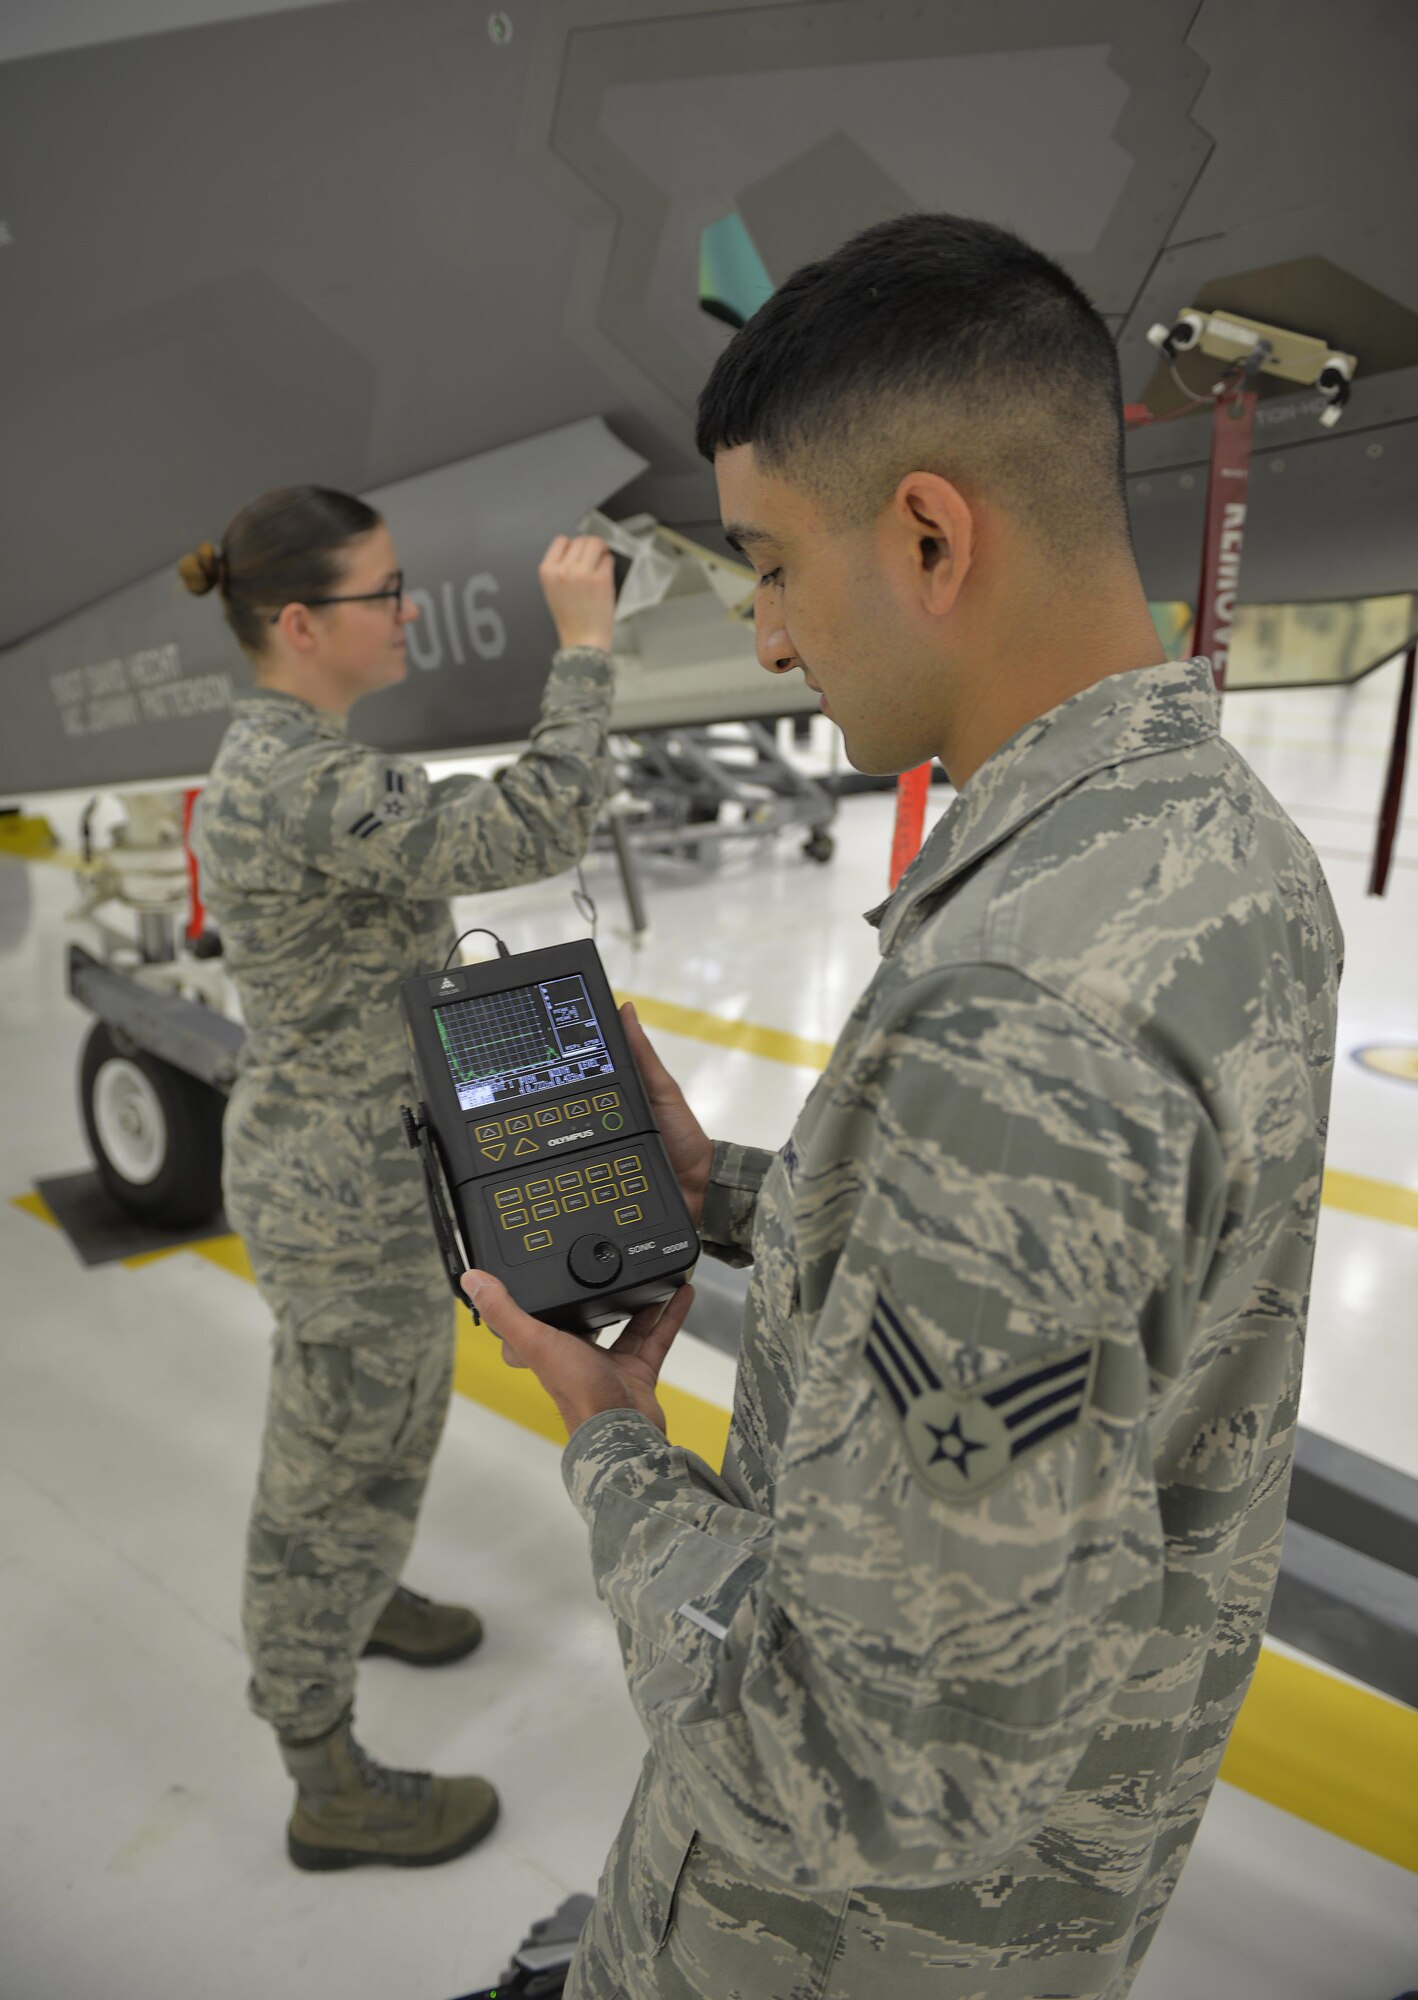 Senior Airman Santiago De La Rosa, 33rd Maintenance Squadron nondestructive inspection journeyman, assists Airman 1st Class Emily Greaves, 33rd MXS NDI apprentice, by monitoring the readings on a transducer, which looks for cracks in the low observable paint of an F-35A Lightning II at Eglin Air Force Base Fla., May 17, 2016. This practice ensures the effectiveness of the jet’s stealth capability by identifying any potential cracks.  (U.S. Air Force photo/Senior Airman Andrea Posey)